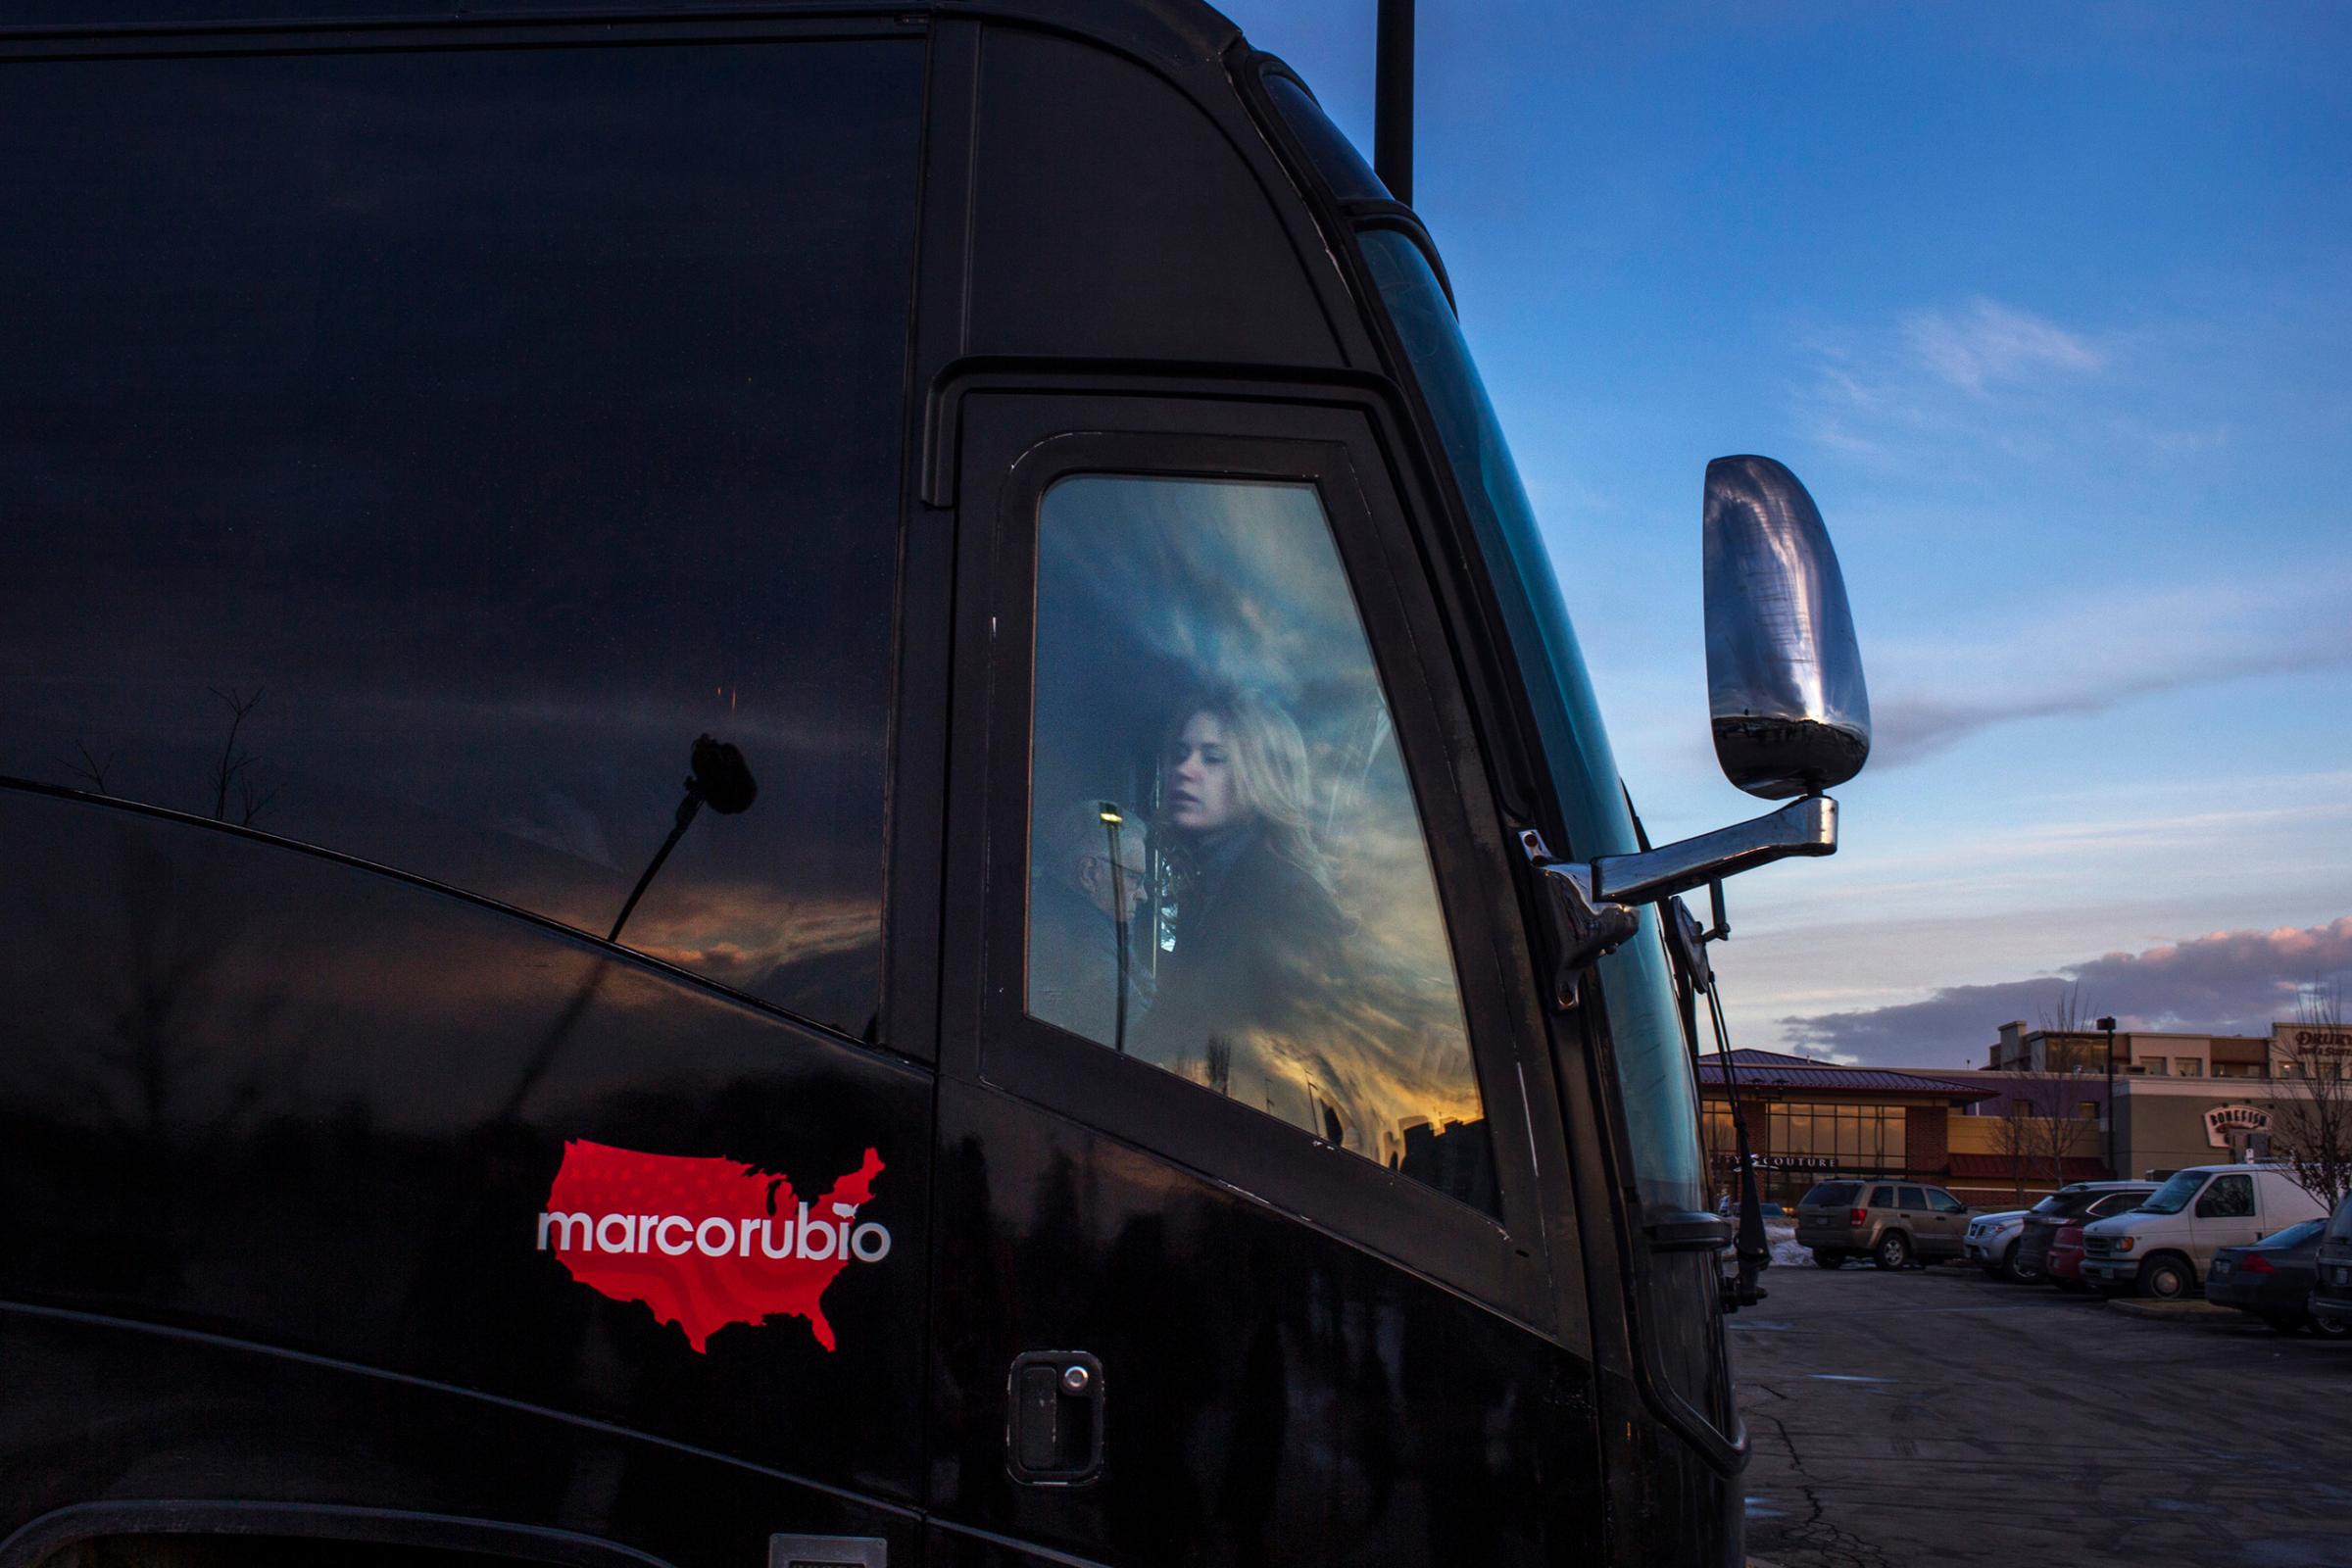 Rubio's bus is seen before he comes out. Marco Rubio spoke to supporters at a campaign rally at the Wellman's Pub and Rooftop in Des Moines Iowa on Wednesday evening, January 27th 2016. (Natalie Keyssar for TIME)